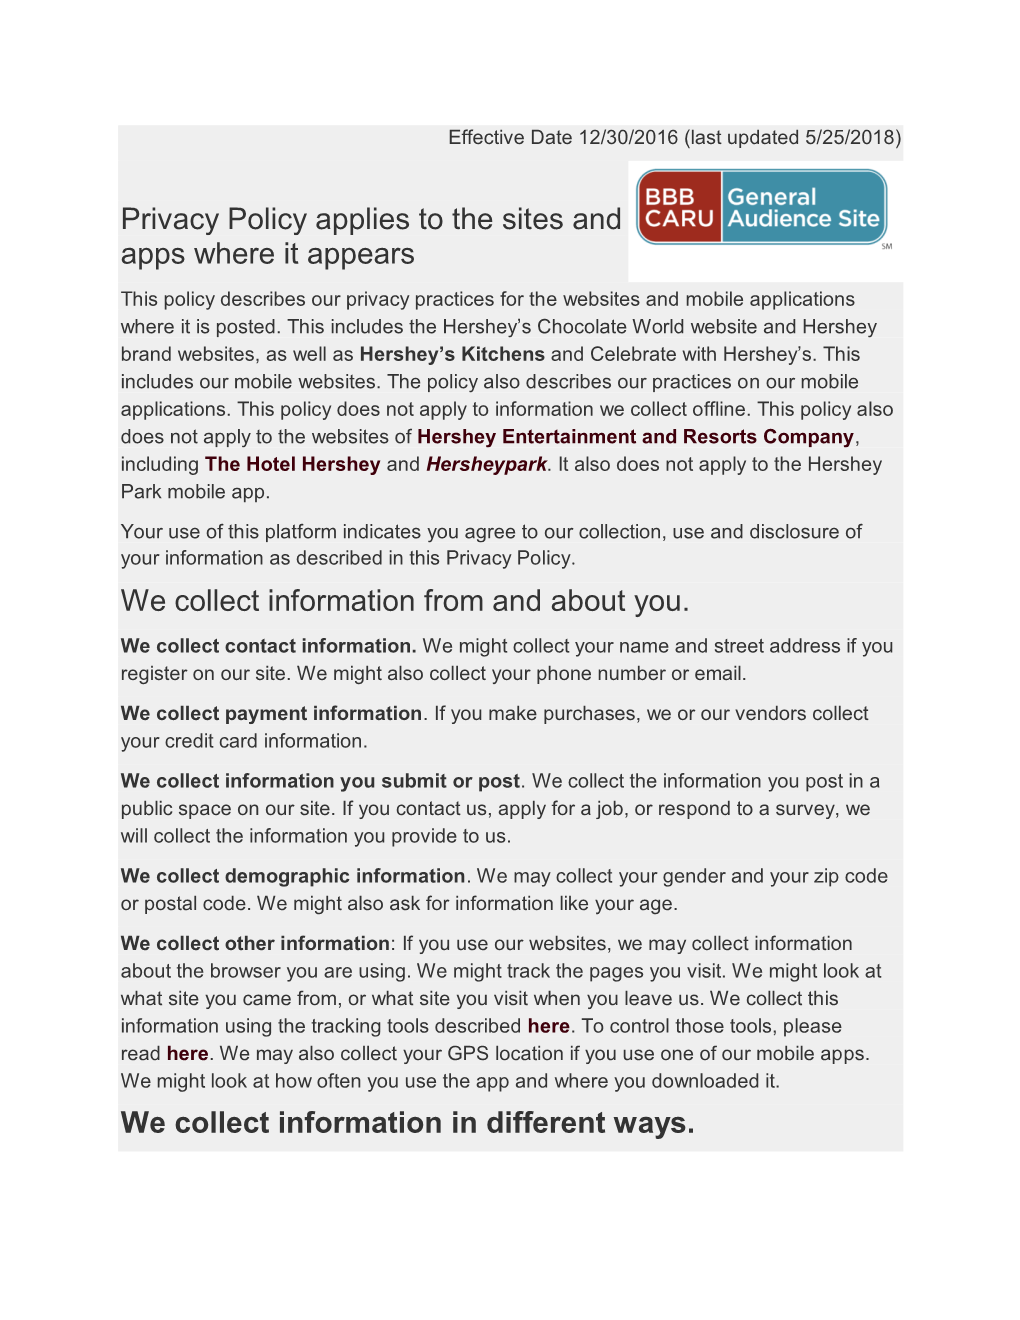 Download a Copy of This Full Privacy Policy